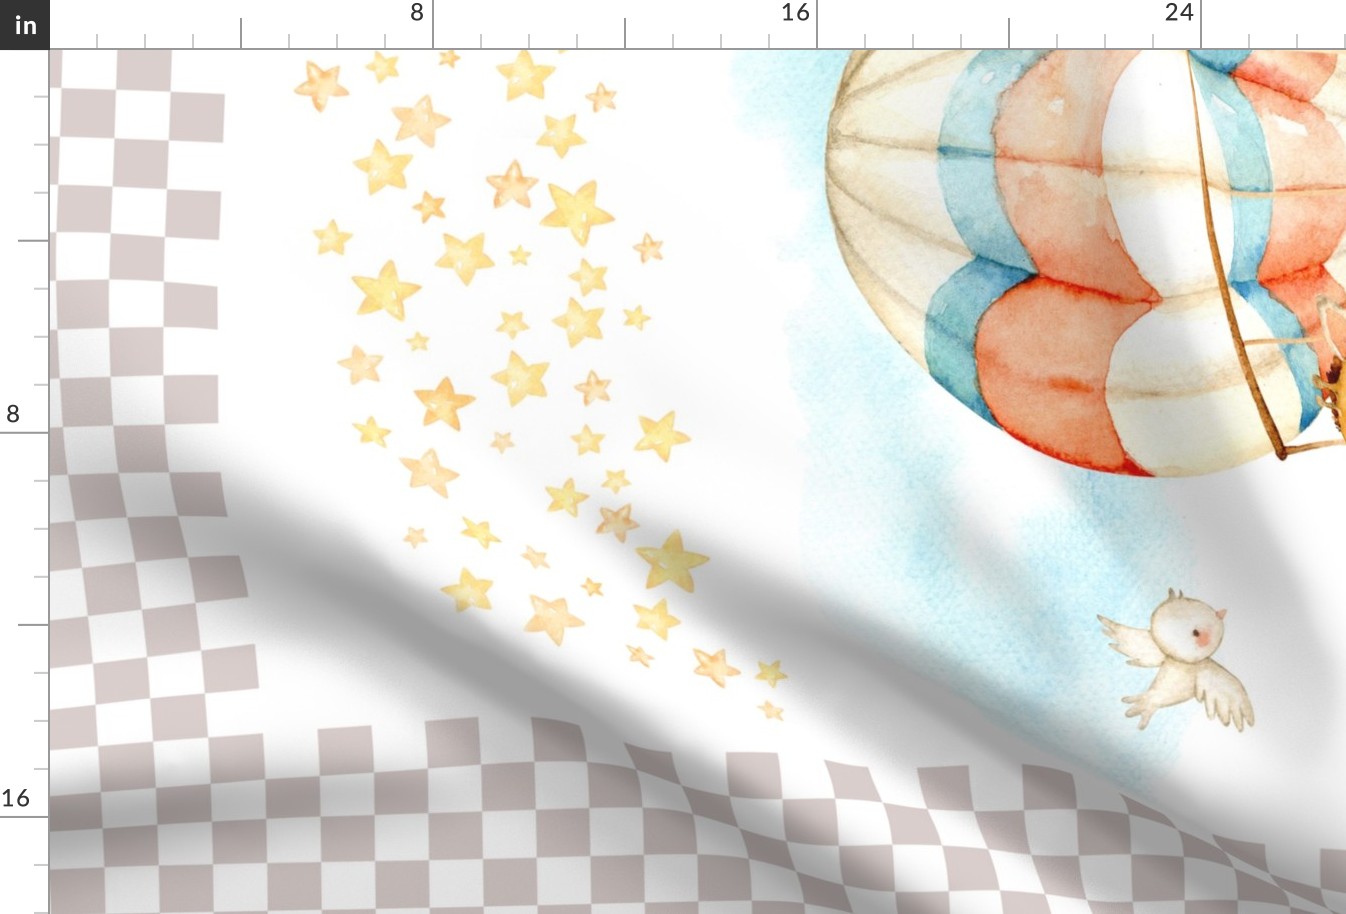 54”x36” MINKY Panel – Hot Air Balloon Baby Blanket, Nursery Bedding, FABRIC REQUIRED IS 54” or WIDER